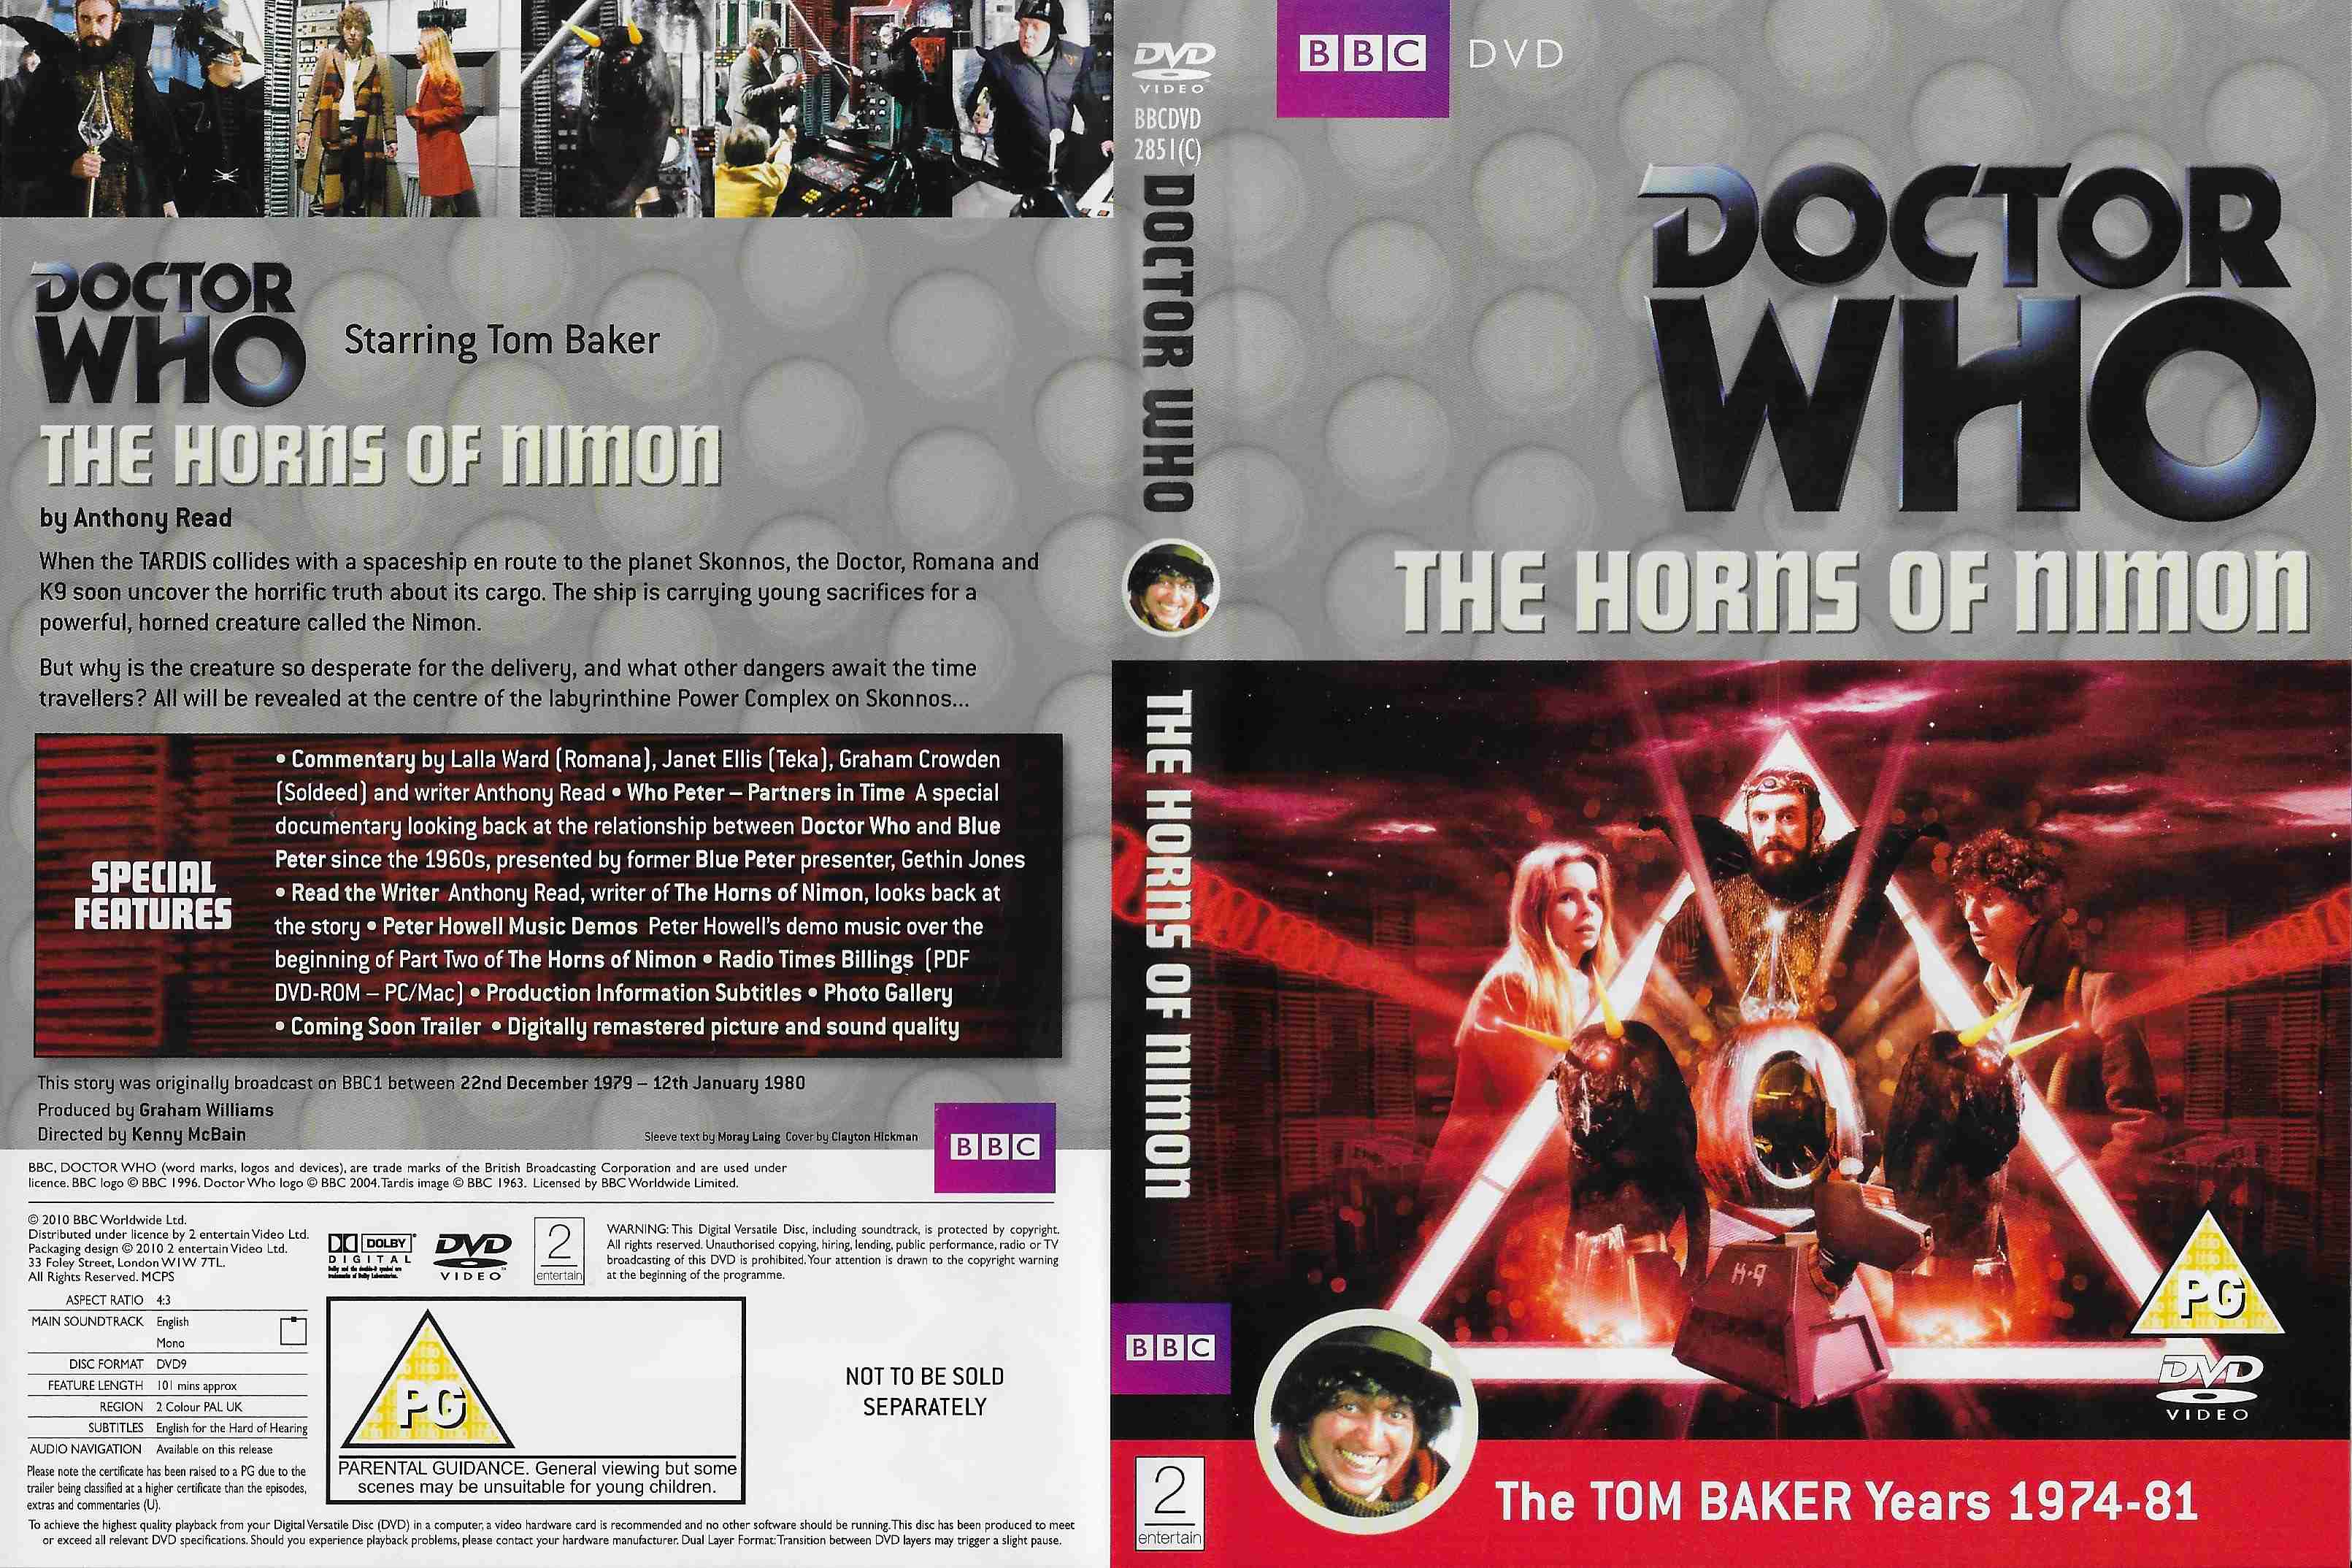 Picture of BBCDVD 2851C Doctor Who - The horns of Nimon by artist Anthony Read from the BBC records and Tapes library